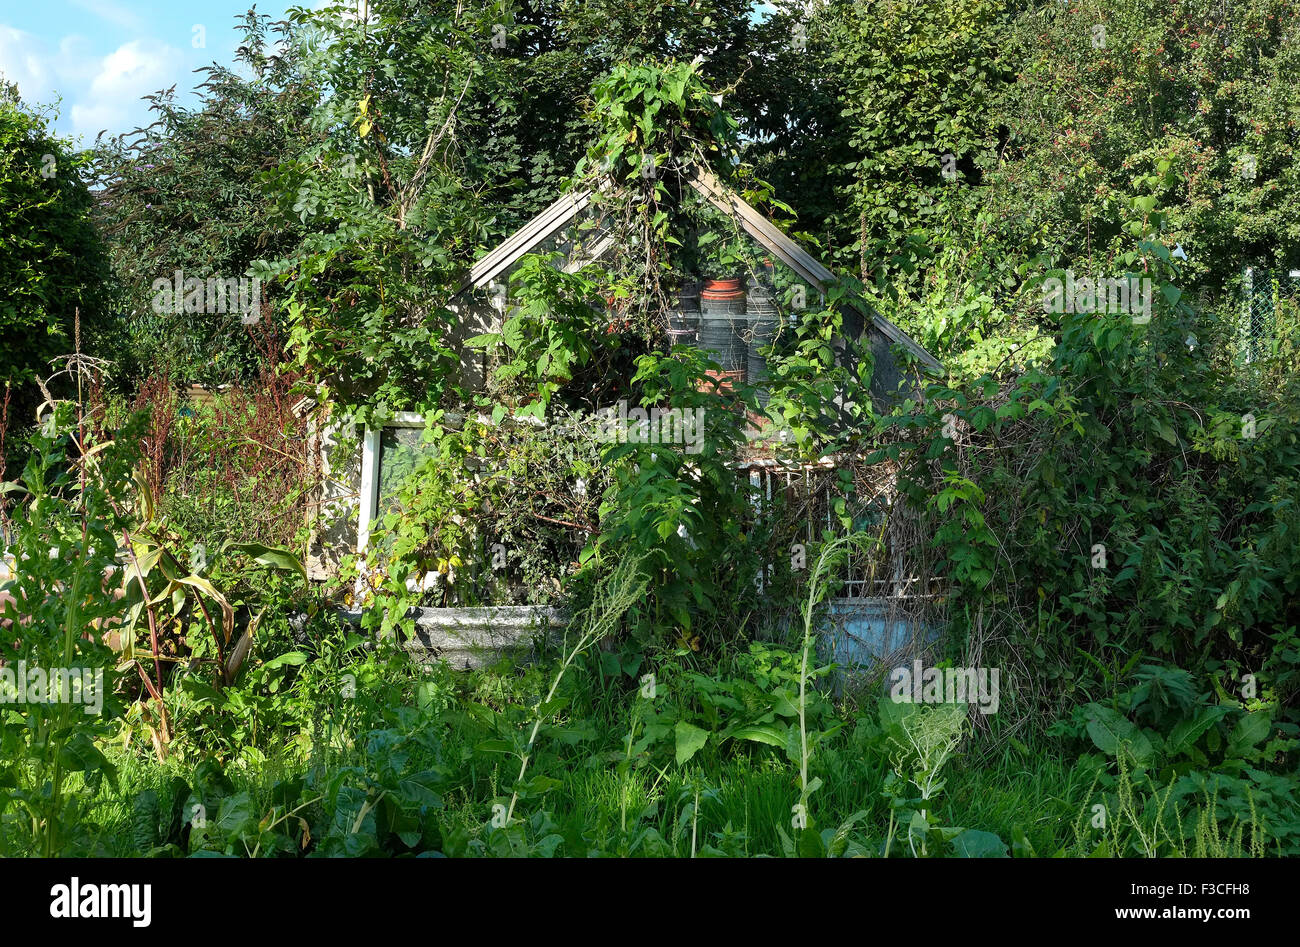 overgrown foliage growing over greenhouse in allotment garden Stock Photo